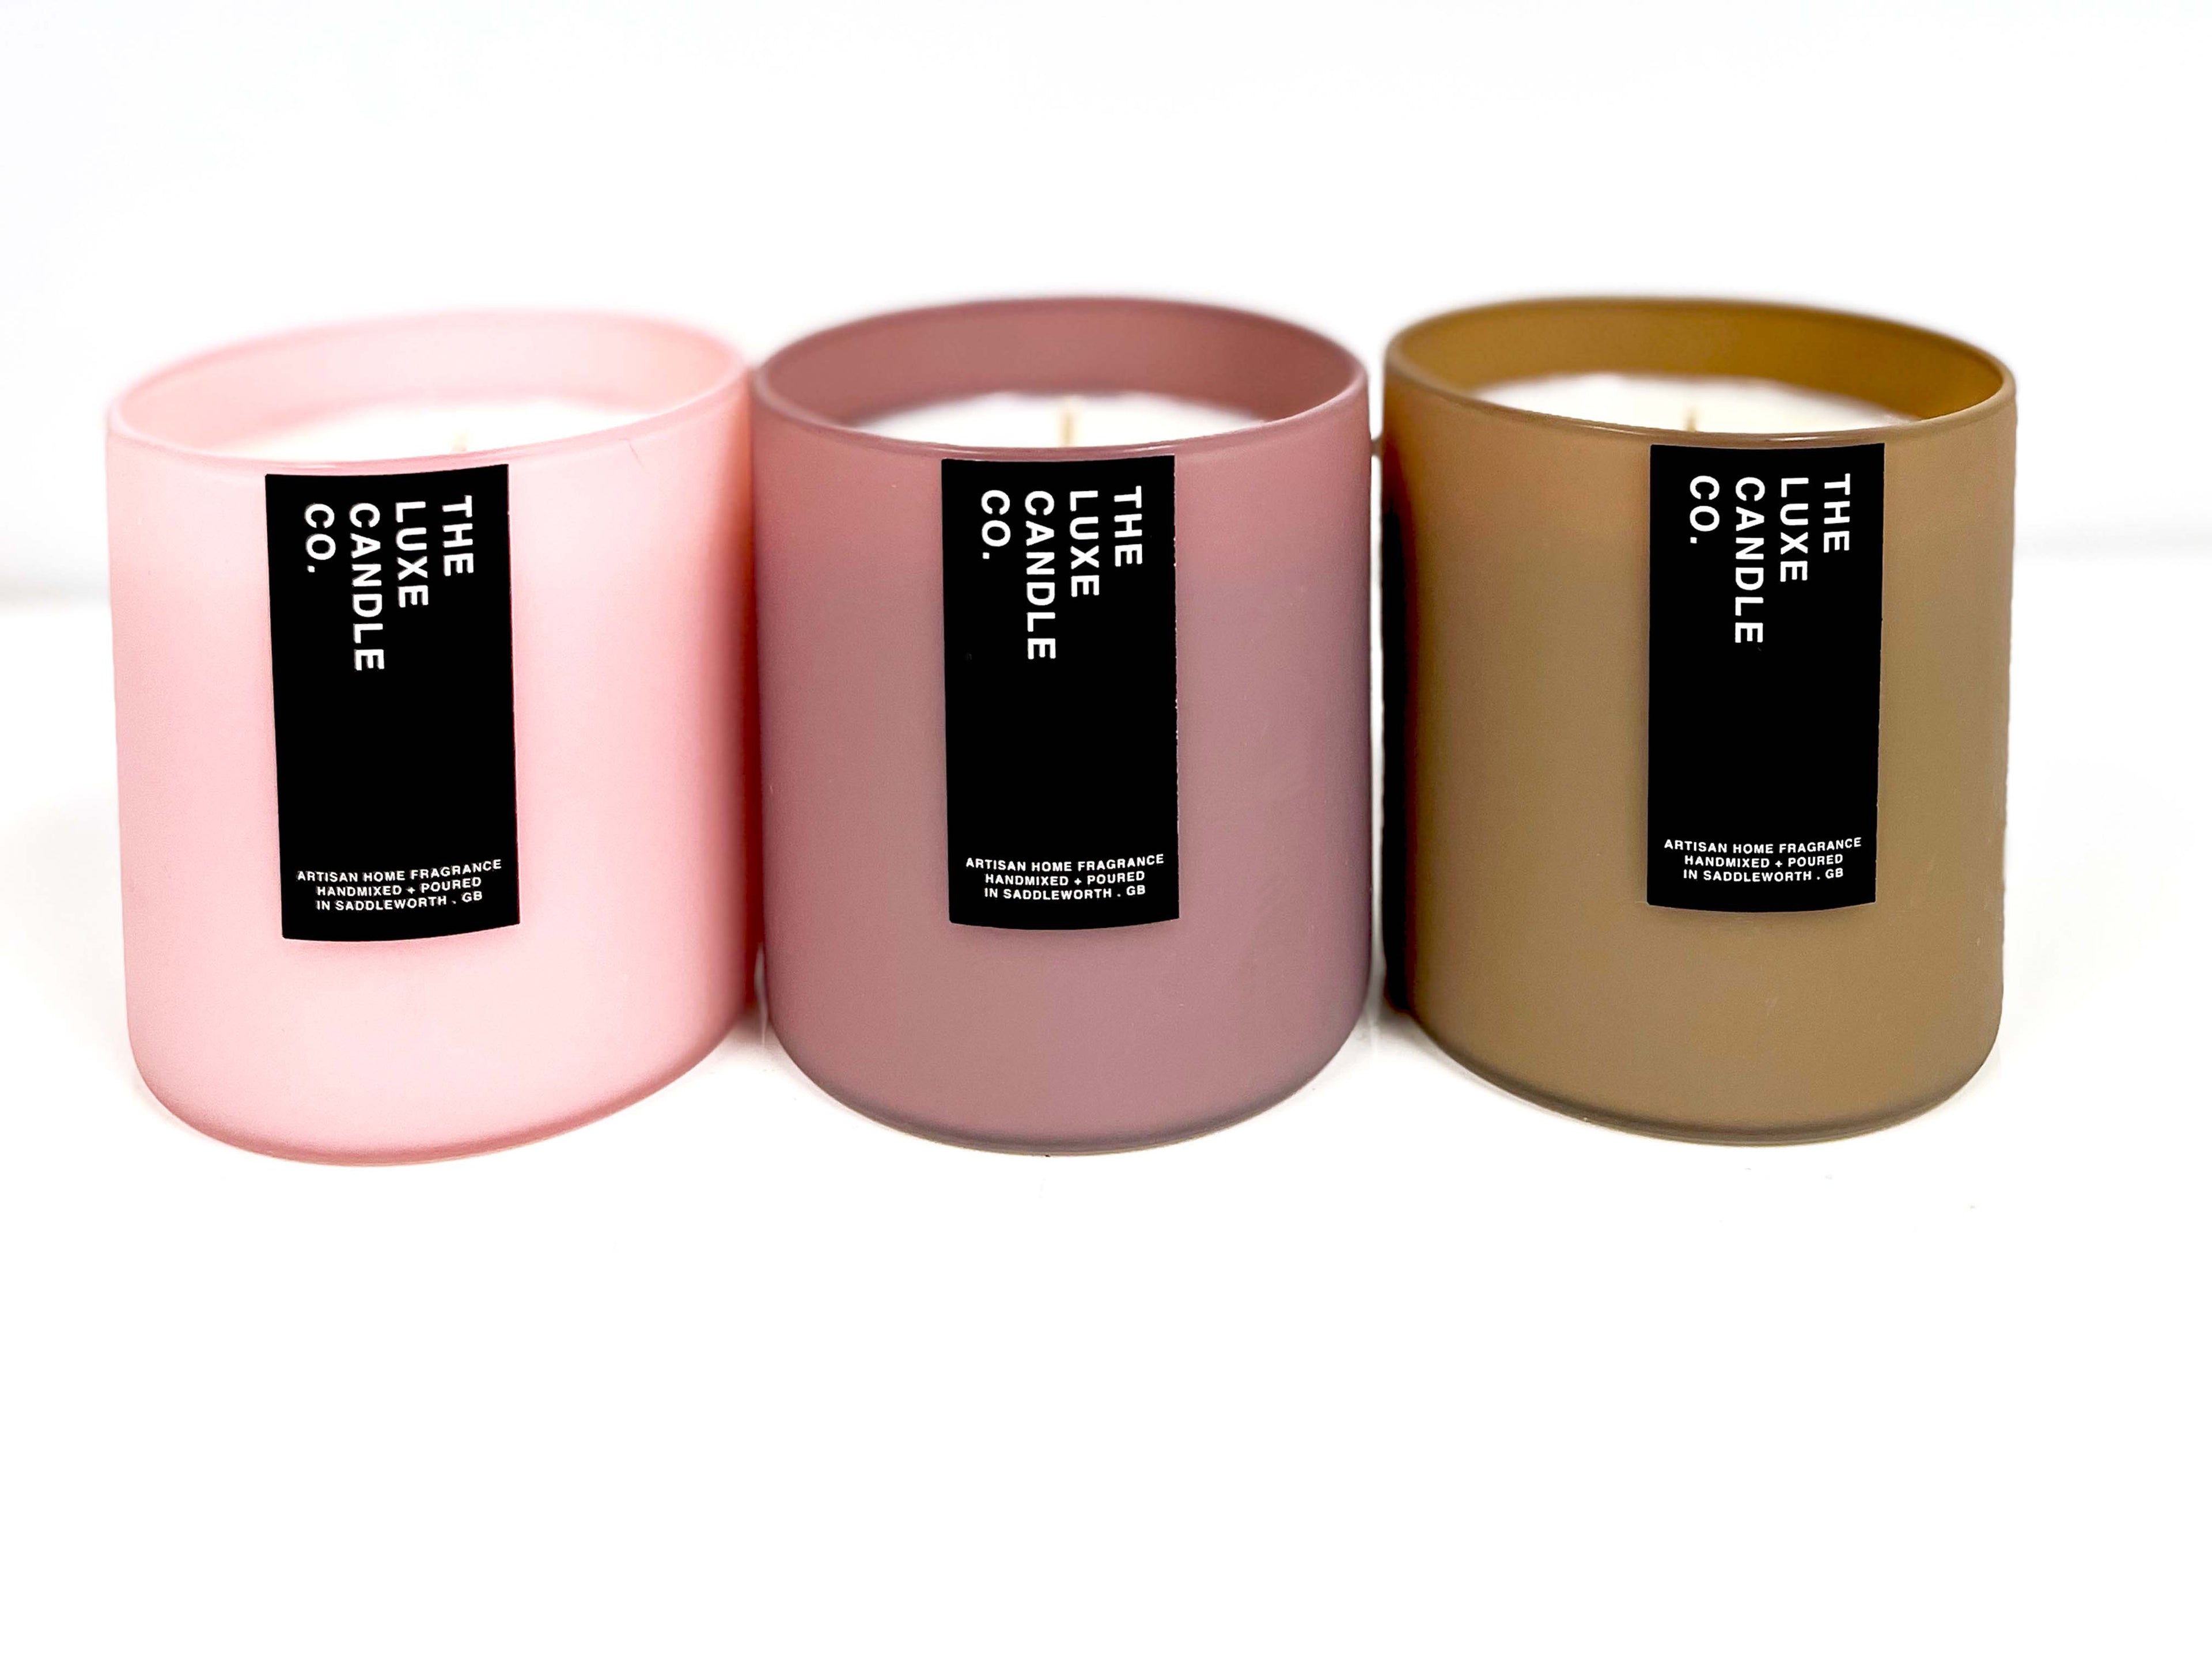 LUXURY CANDLES - Muted pinks berries and spring shades scented candles to welcome in the spring